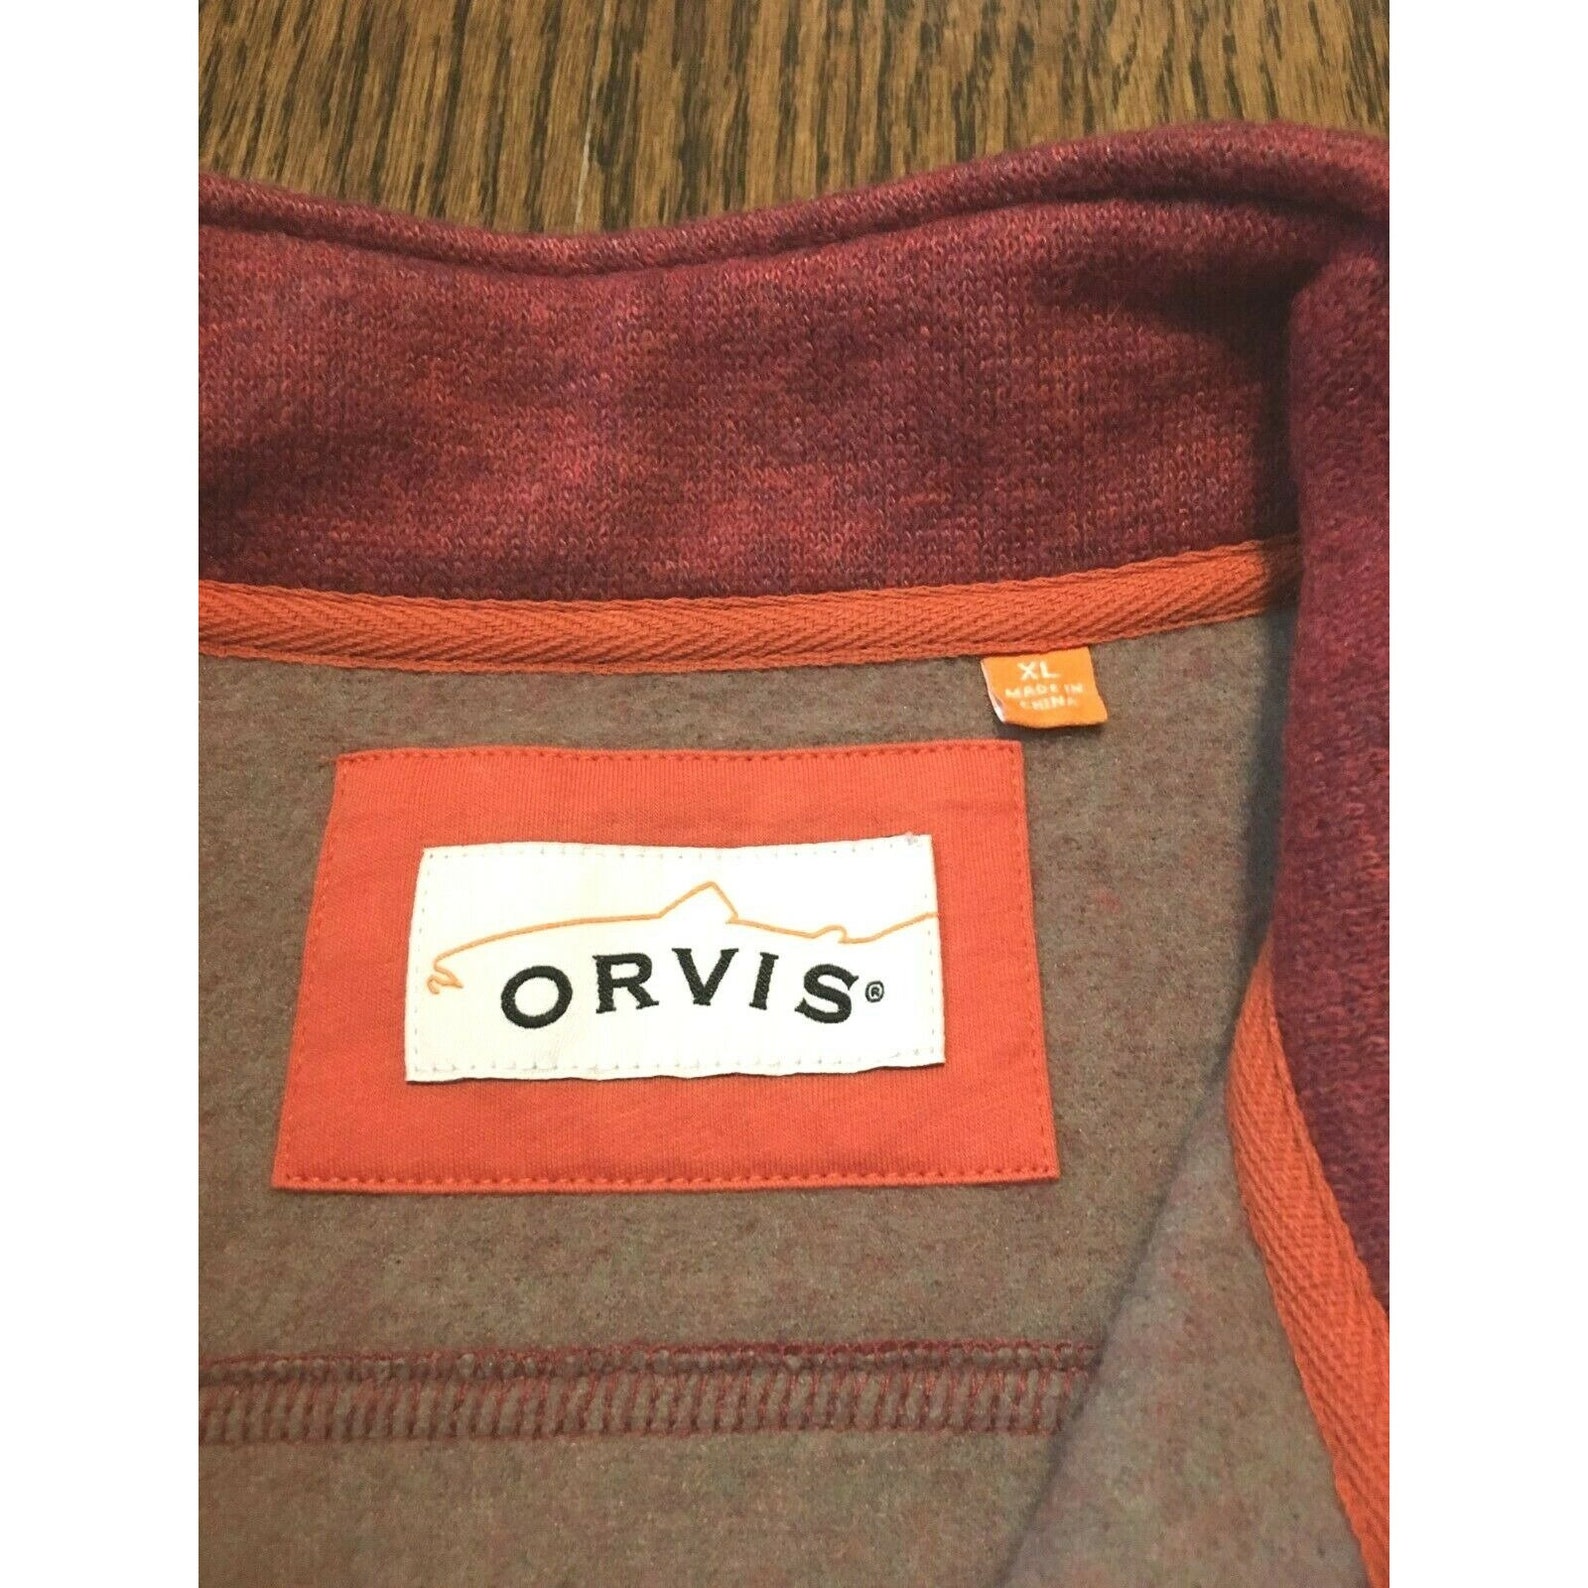 Orvis Trout Bum Fleece Vest Mens XL Fishing Outdoors Hunting | Etsy